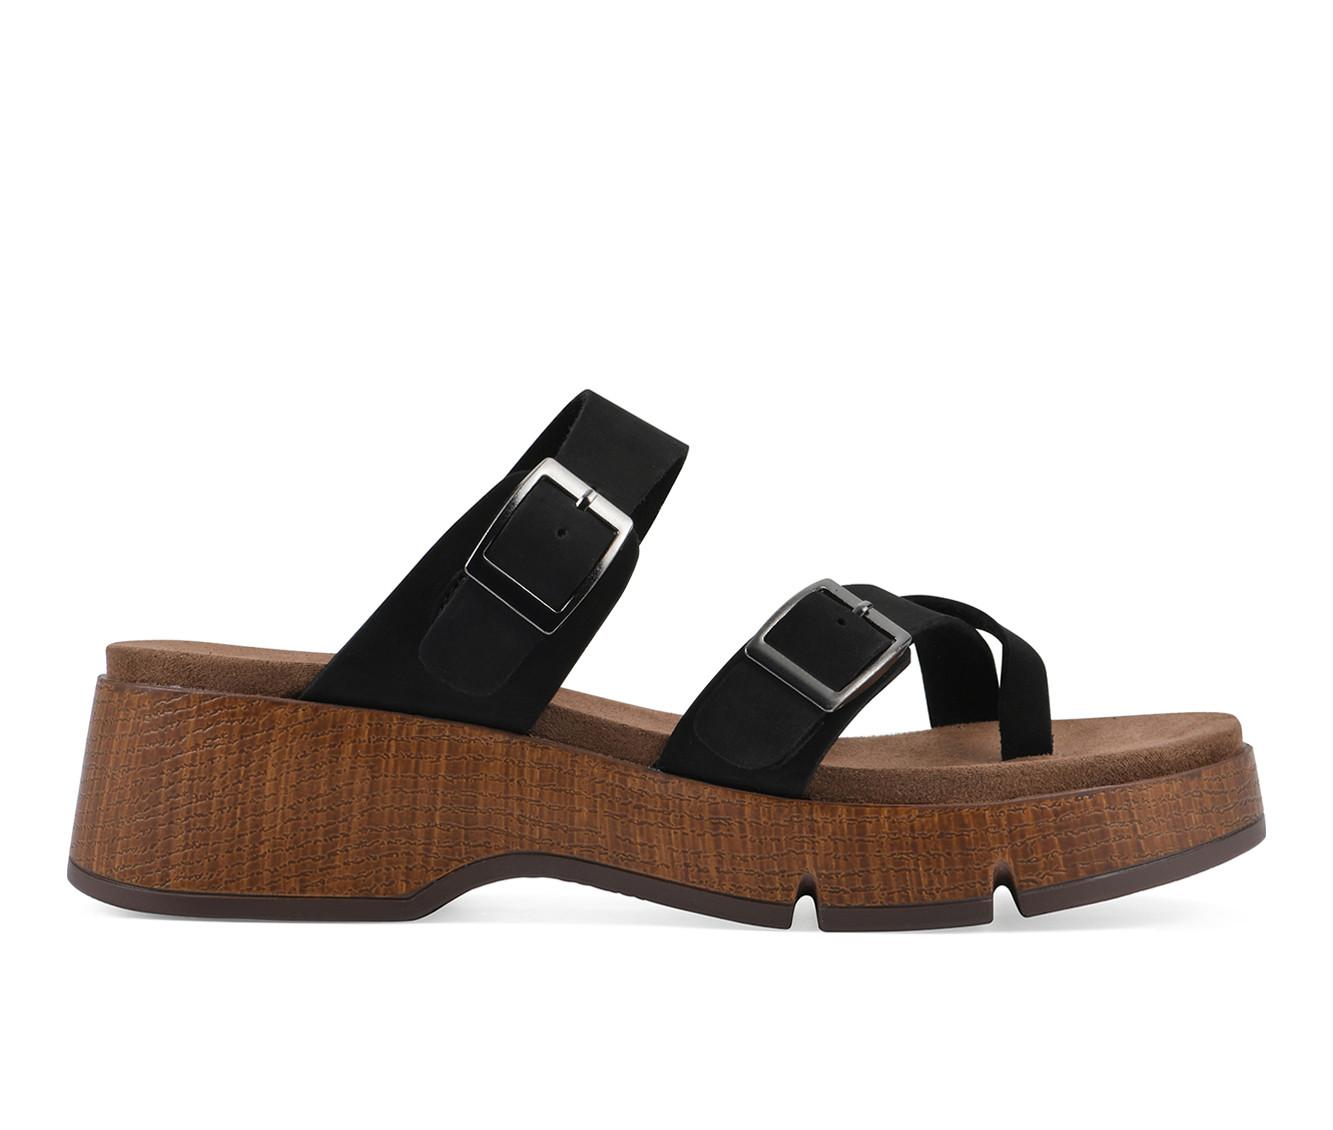 Women's White Mountain Lefter Wedge Sandals